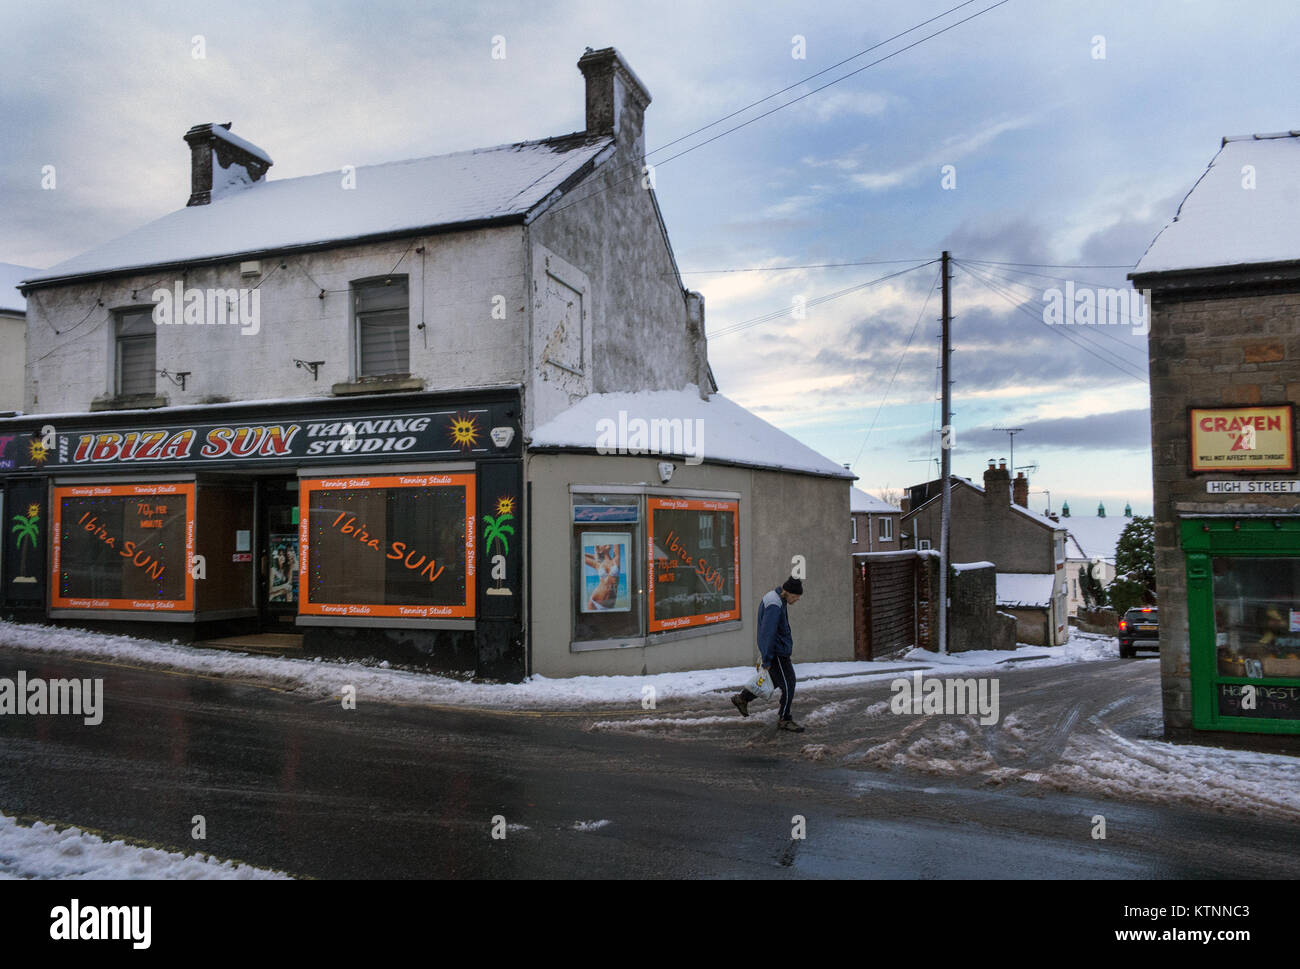 Cinderford, Gloucestershire, UK. 27th Dec, 2017. Snow came to parts of the UK today, this is a scene from Cinderford in the  Forest Of Dean.  Despite  the weather disrupting holiday air traffic, locals here enjoyed "Ibiza Sun" on Cinderford High Street . Credit: DAVID BARRETT/Alamy Live News Stock Photo